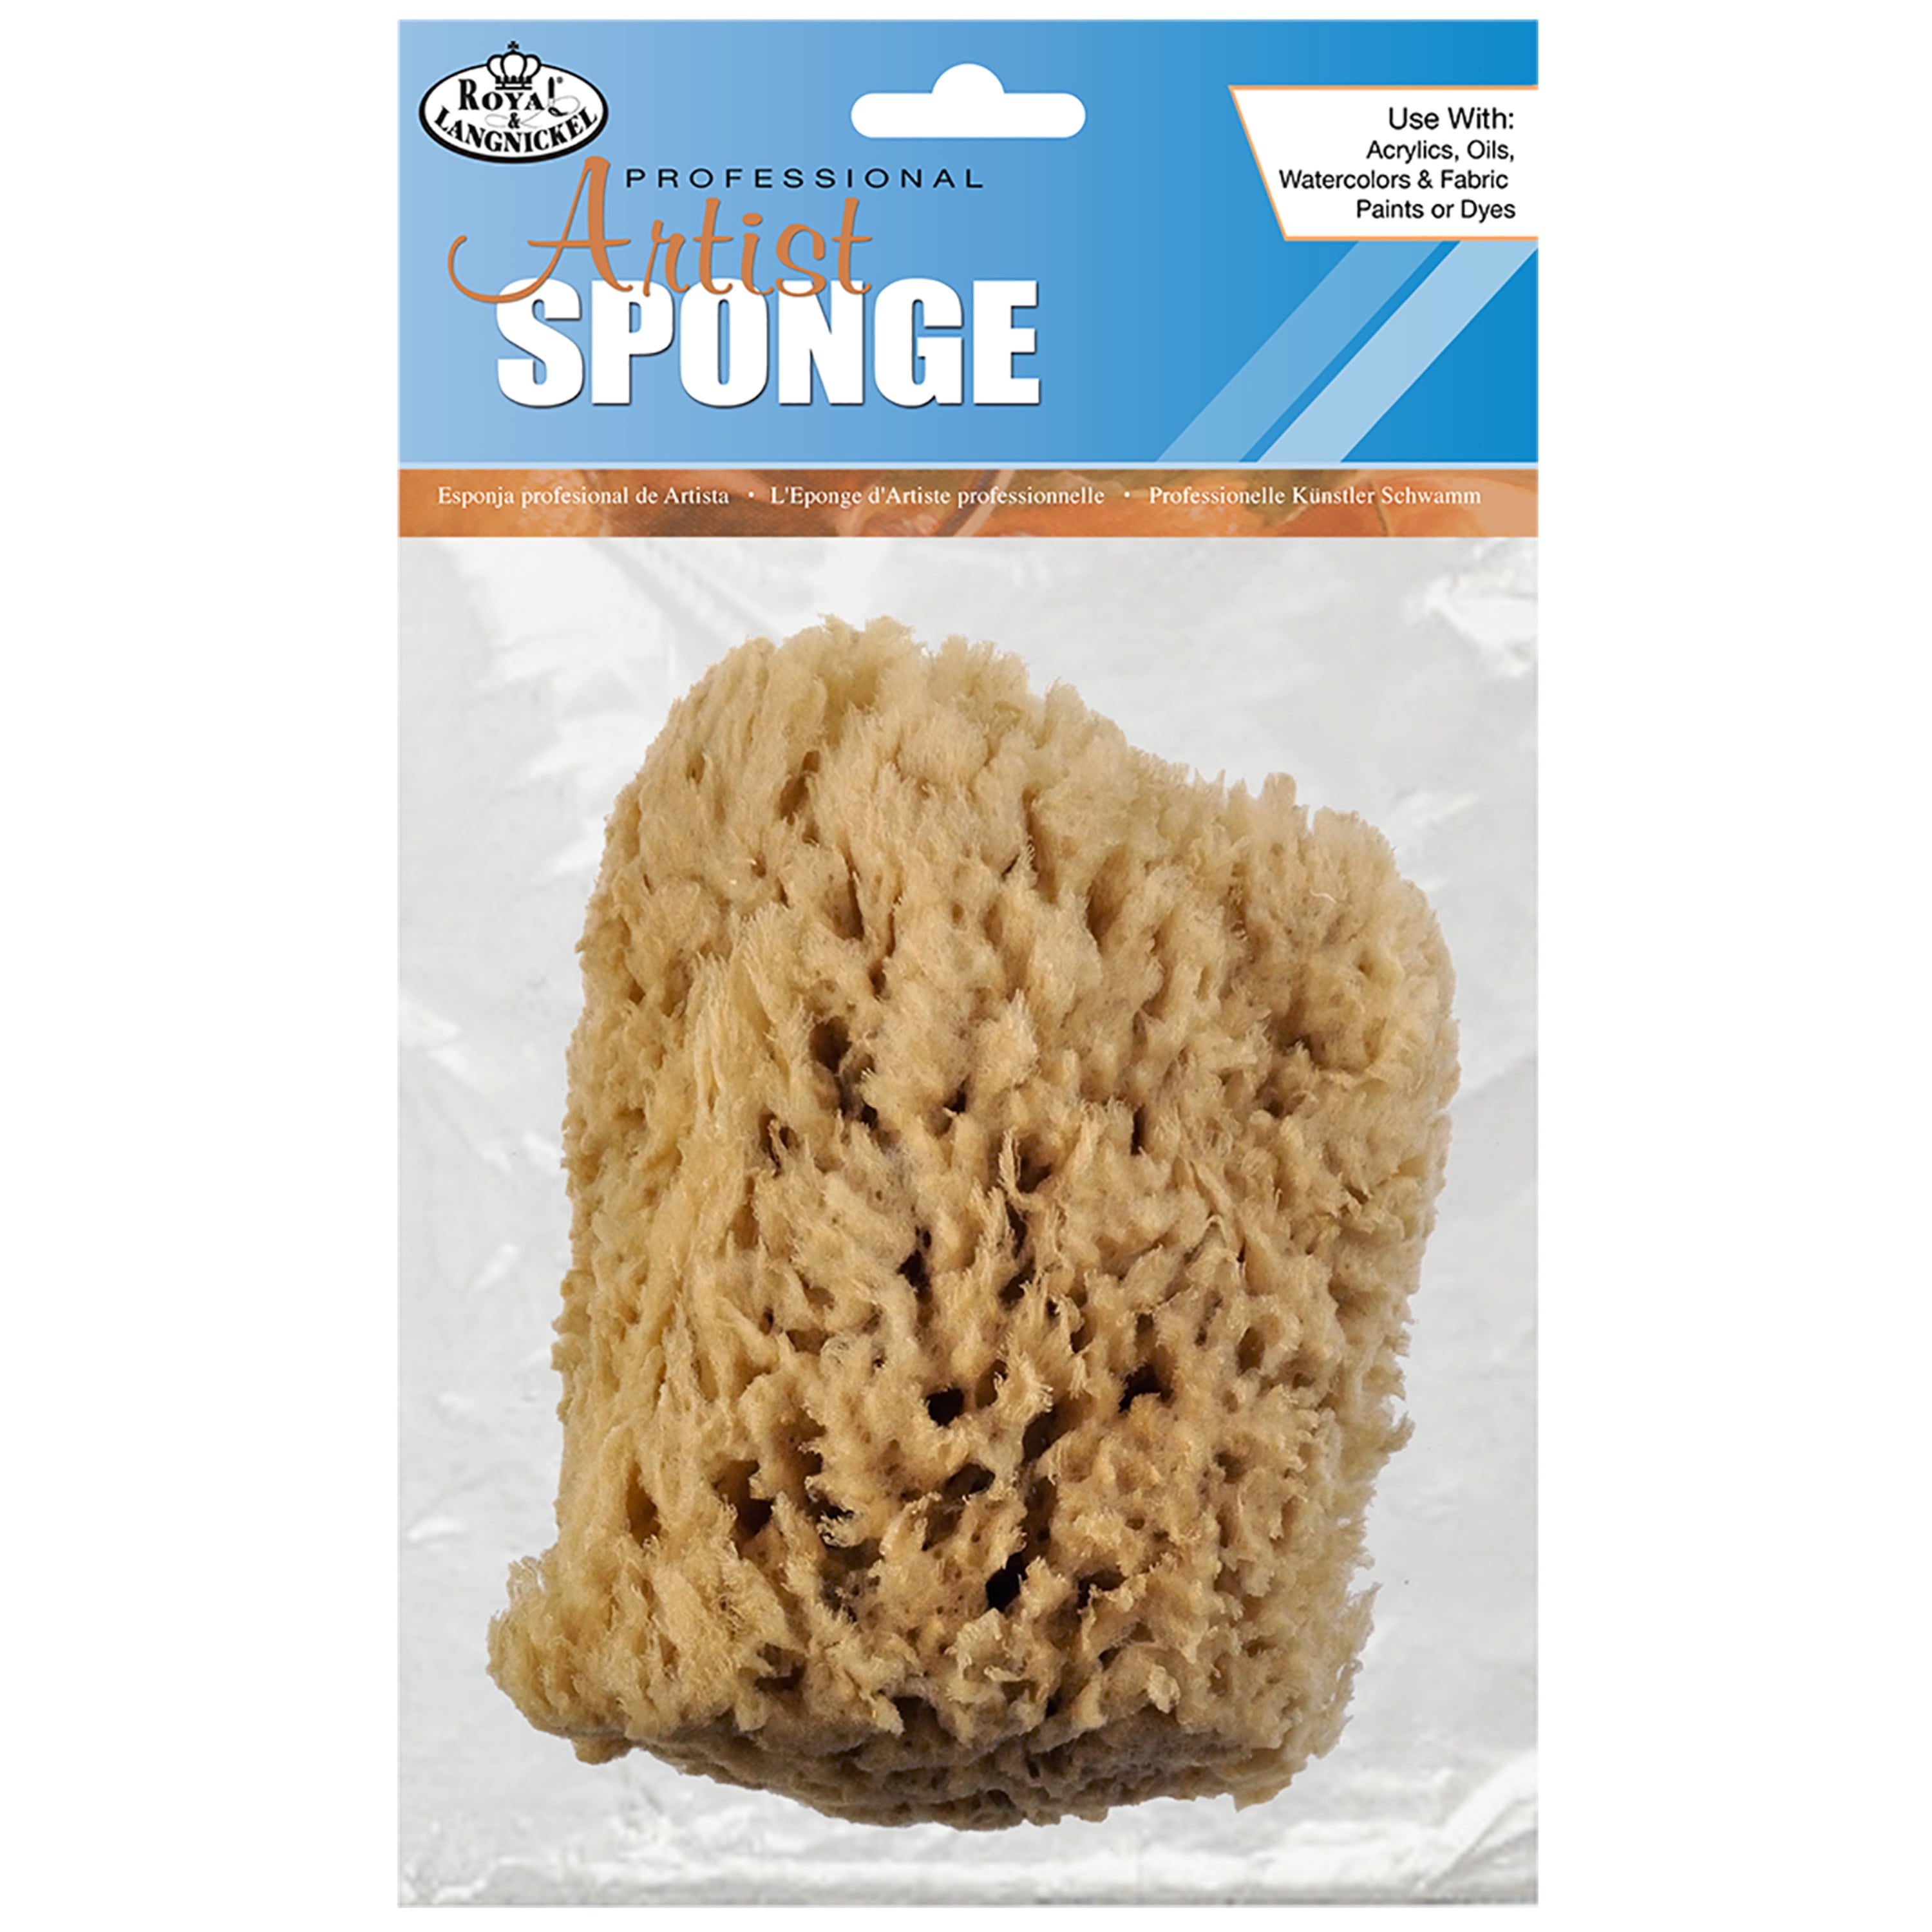 Natural Sea Wool Art Sponge: Premium Professional Grade 5-6 Unbleached,  Excellent for Painting, Decorating, Texturing, Sponging, Marbling Effects